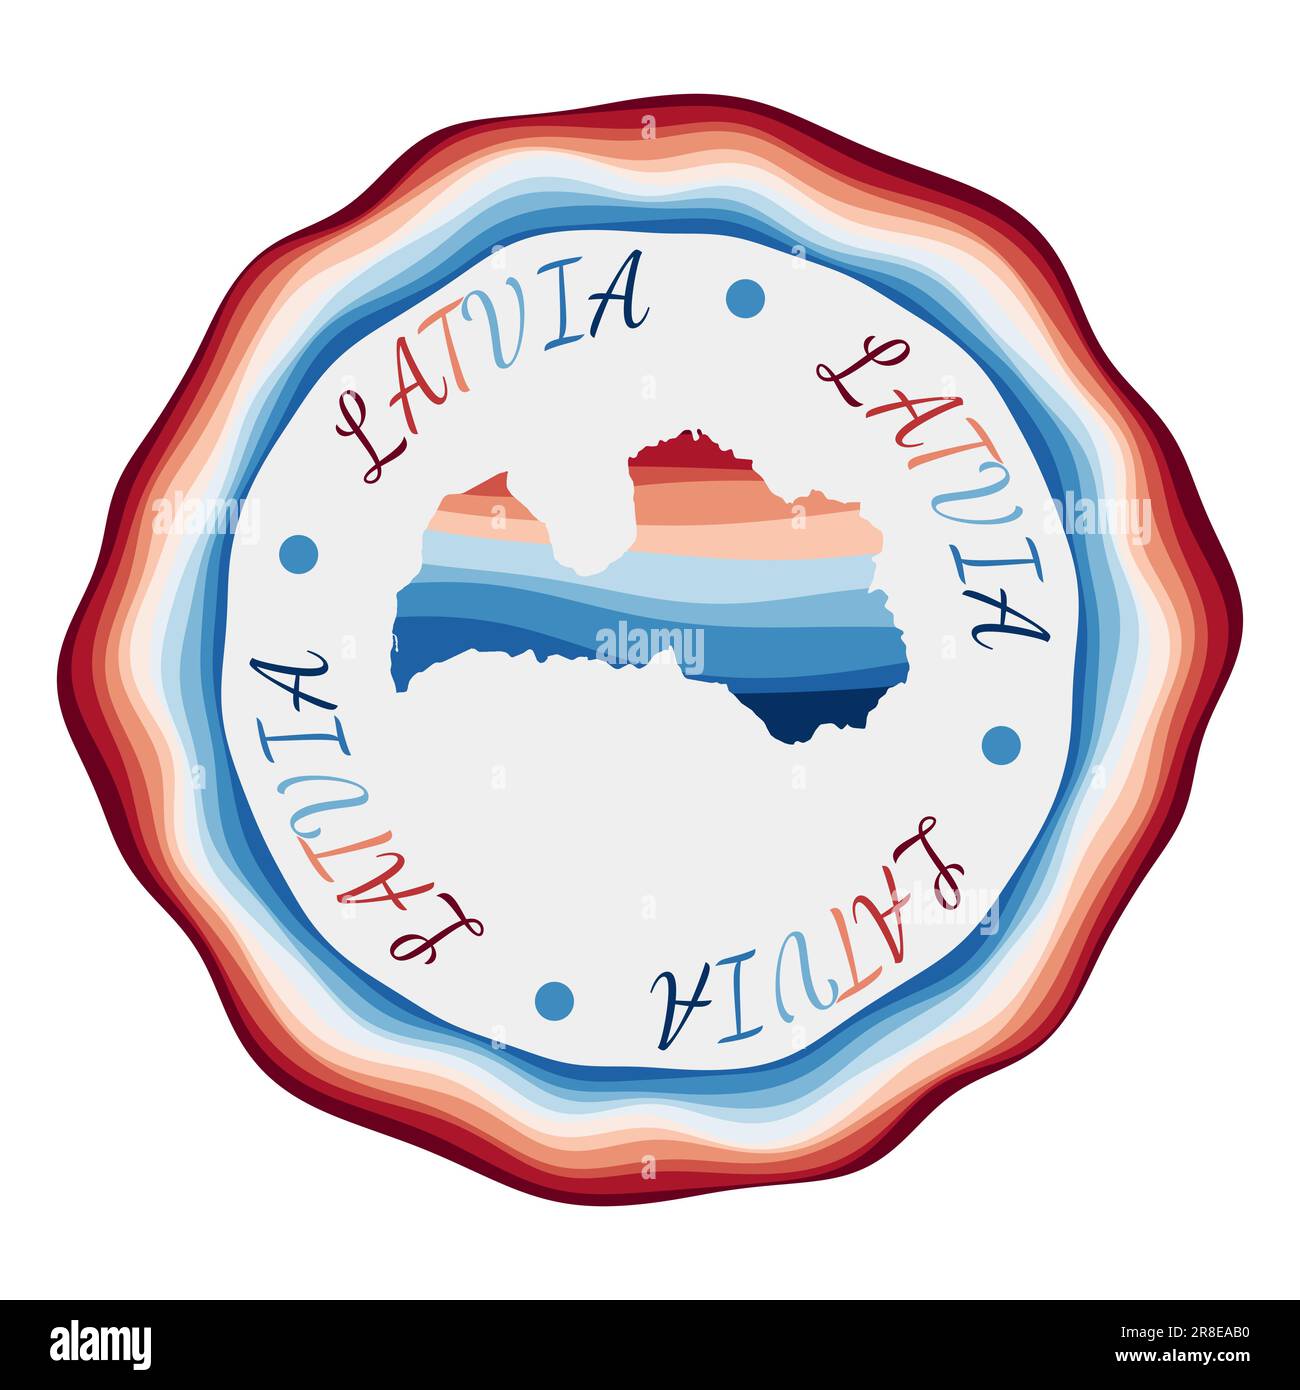 Latvia badge. Map of the country with beautiful geometric waves and vibrant red blue frame. Vivid round Latvia logo. Vector illustration. Stock Vector